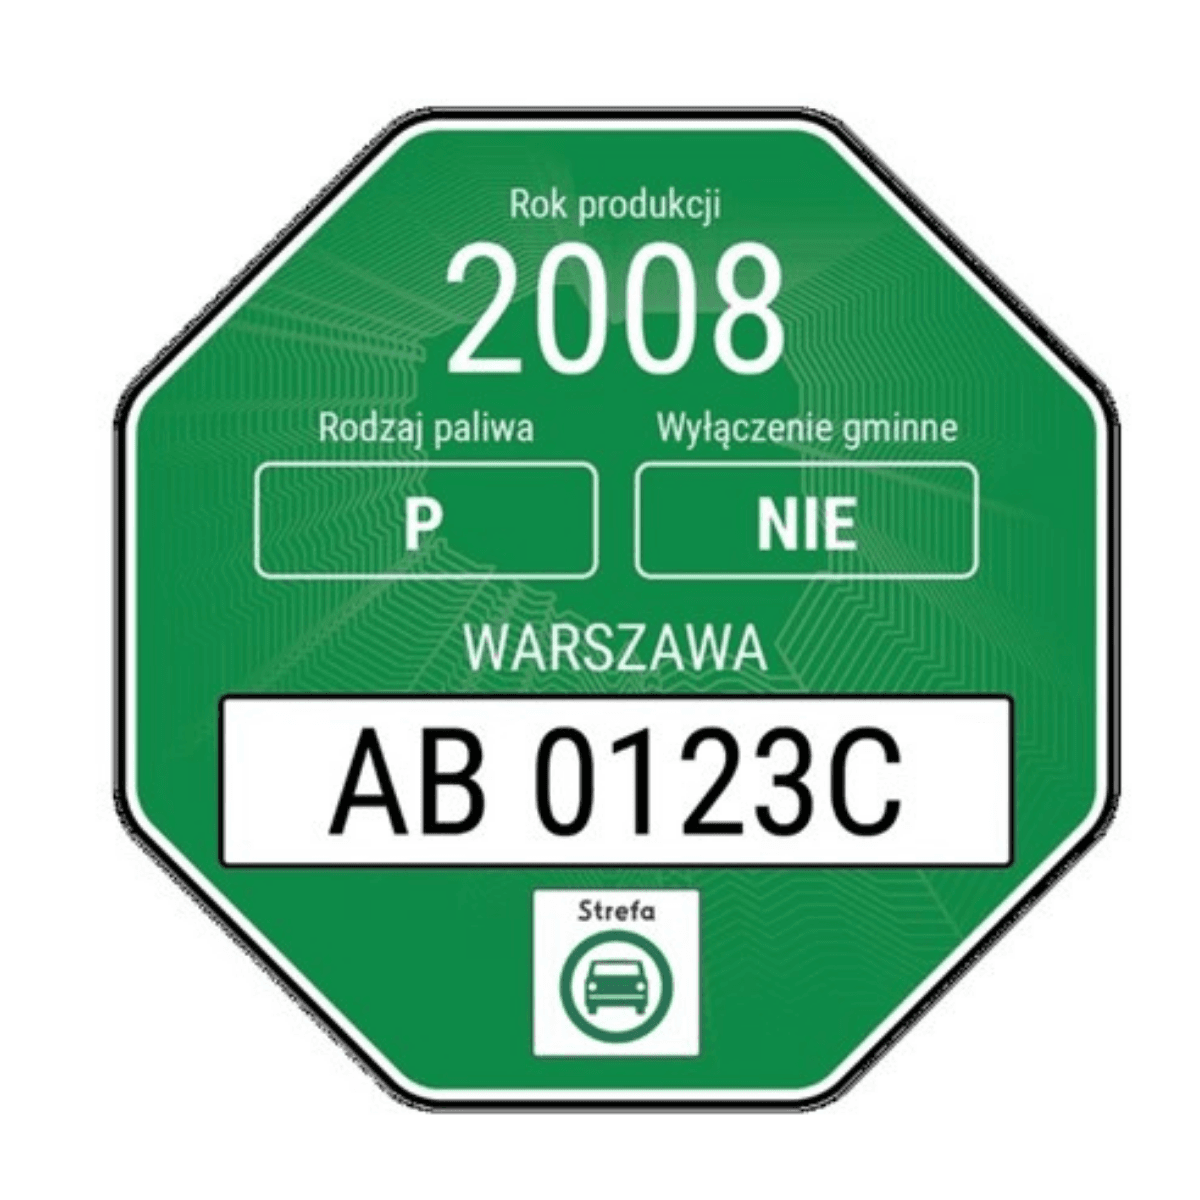 The ecological sticker will soon become an obligation in Poland – image 1